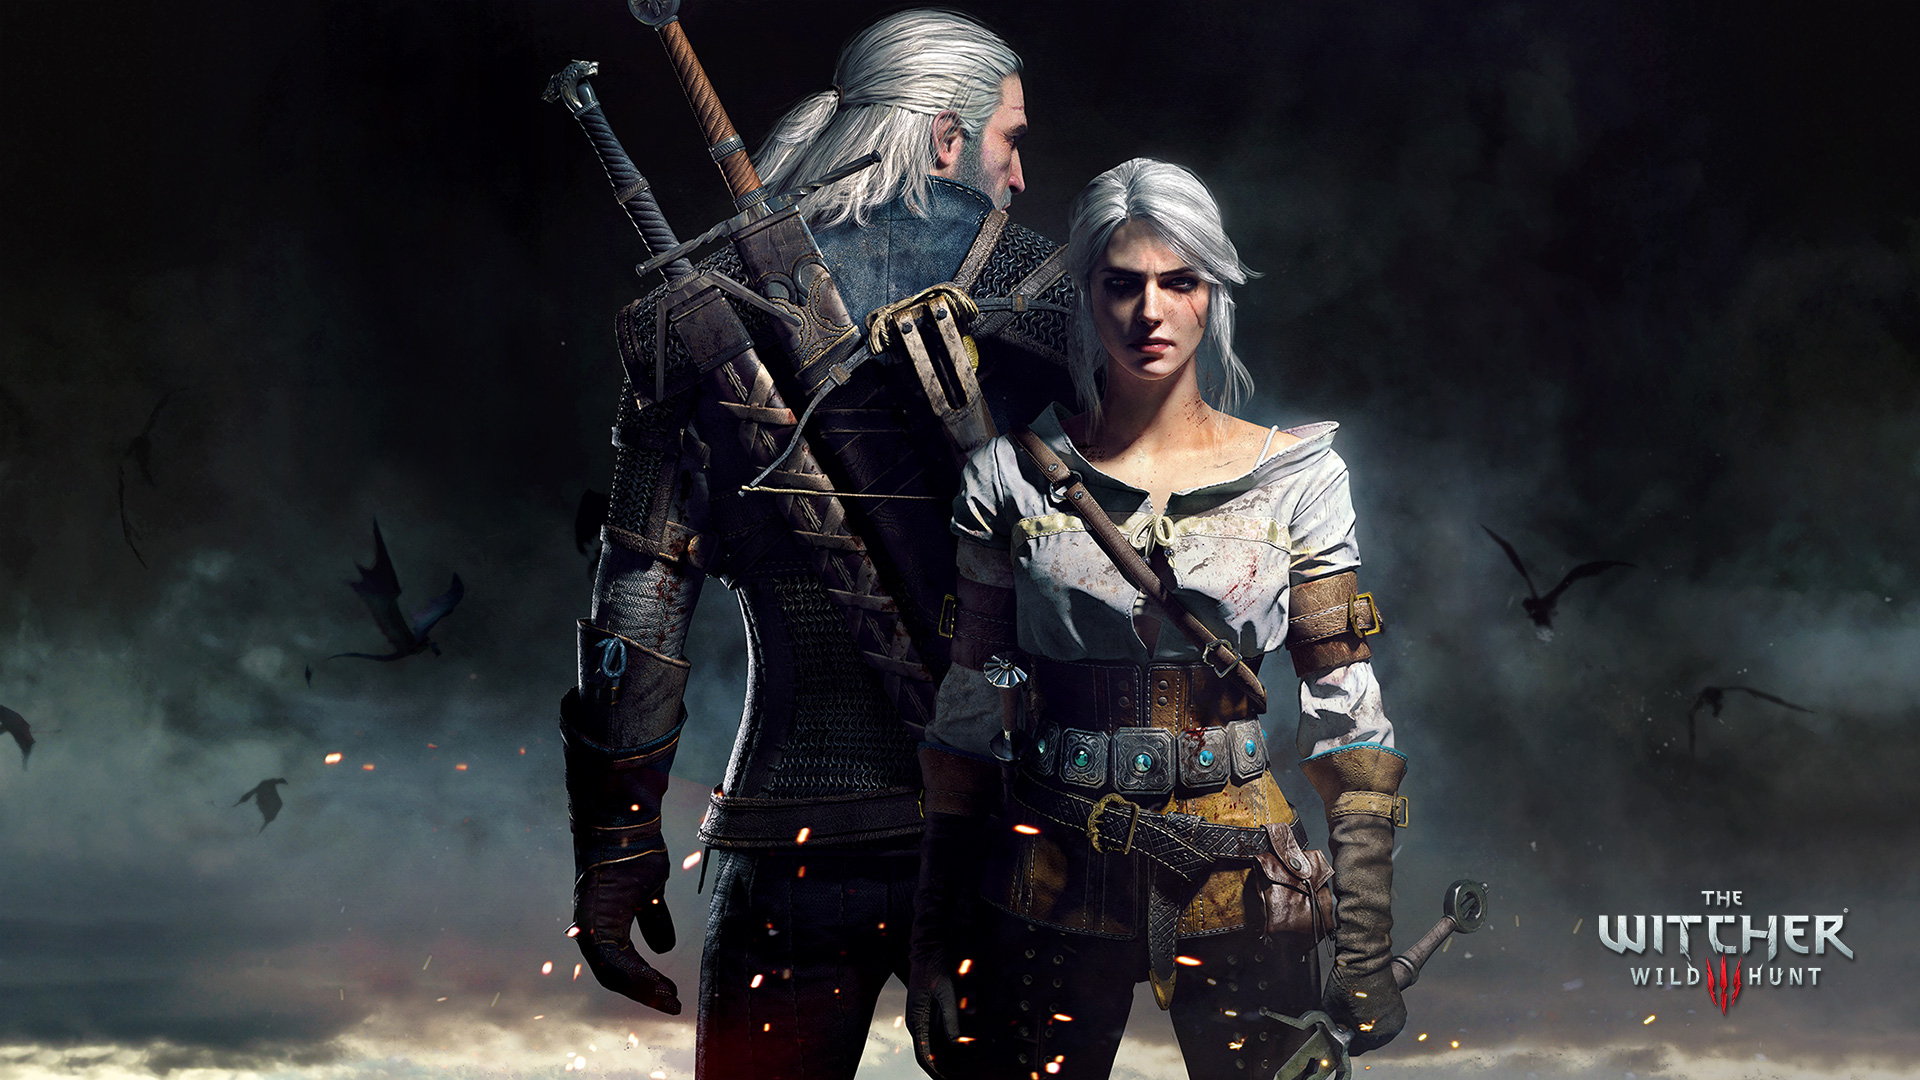 Witcher 3, video game release schedule 2016